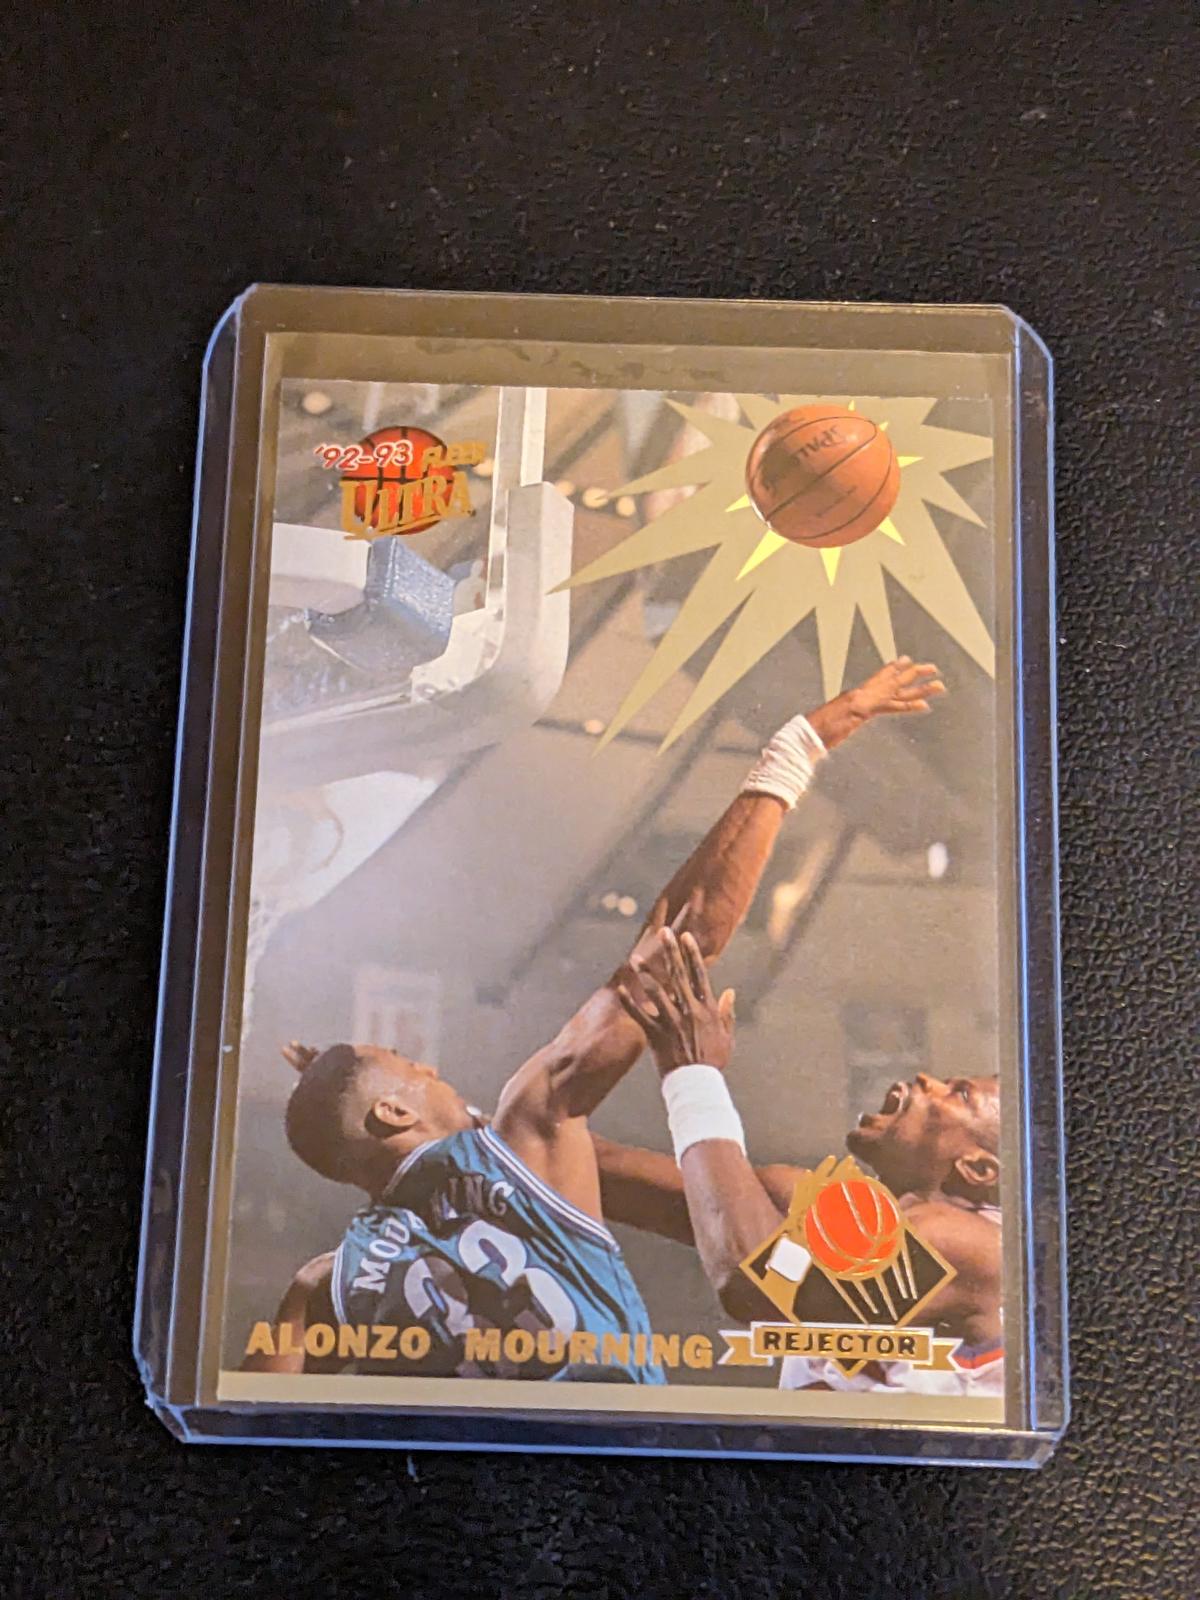 1992 / 1993 Fleer Ultra Alonzo Mourning Rejector No. 1 of 5 Charlotte Hornets